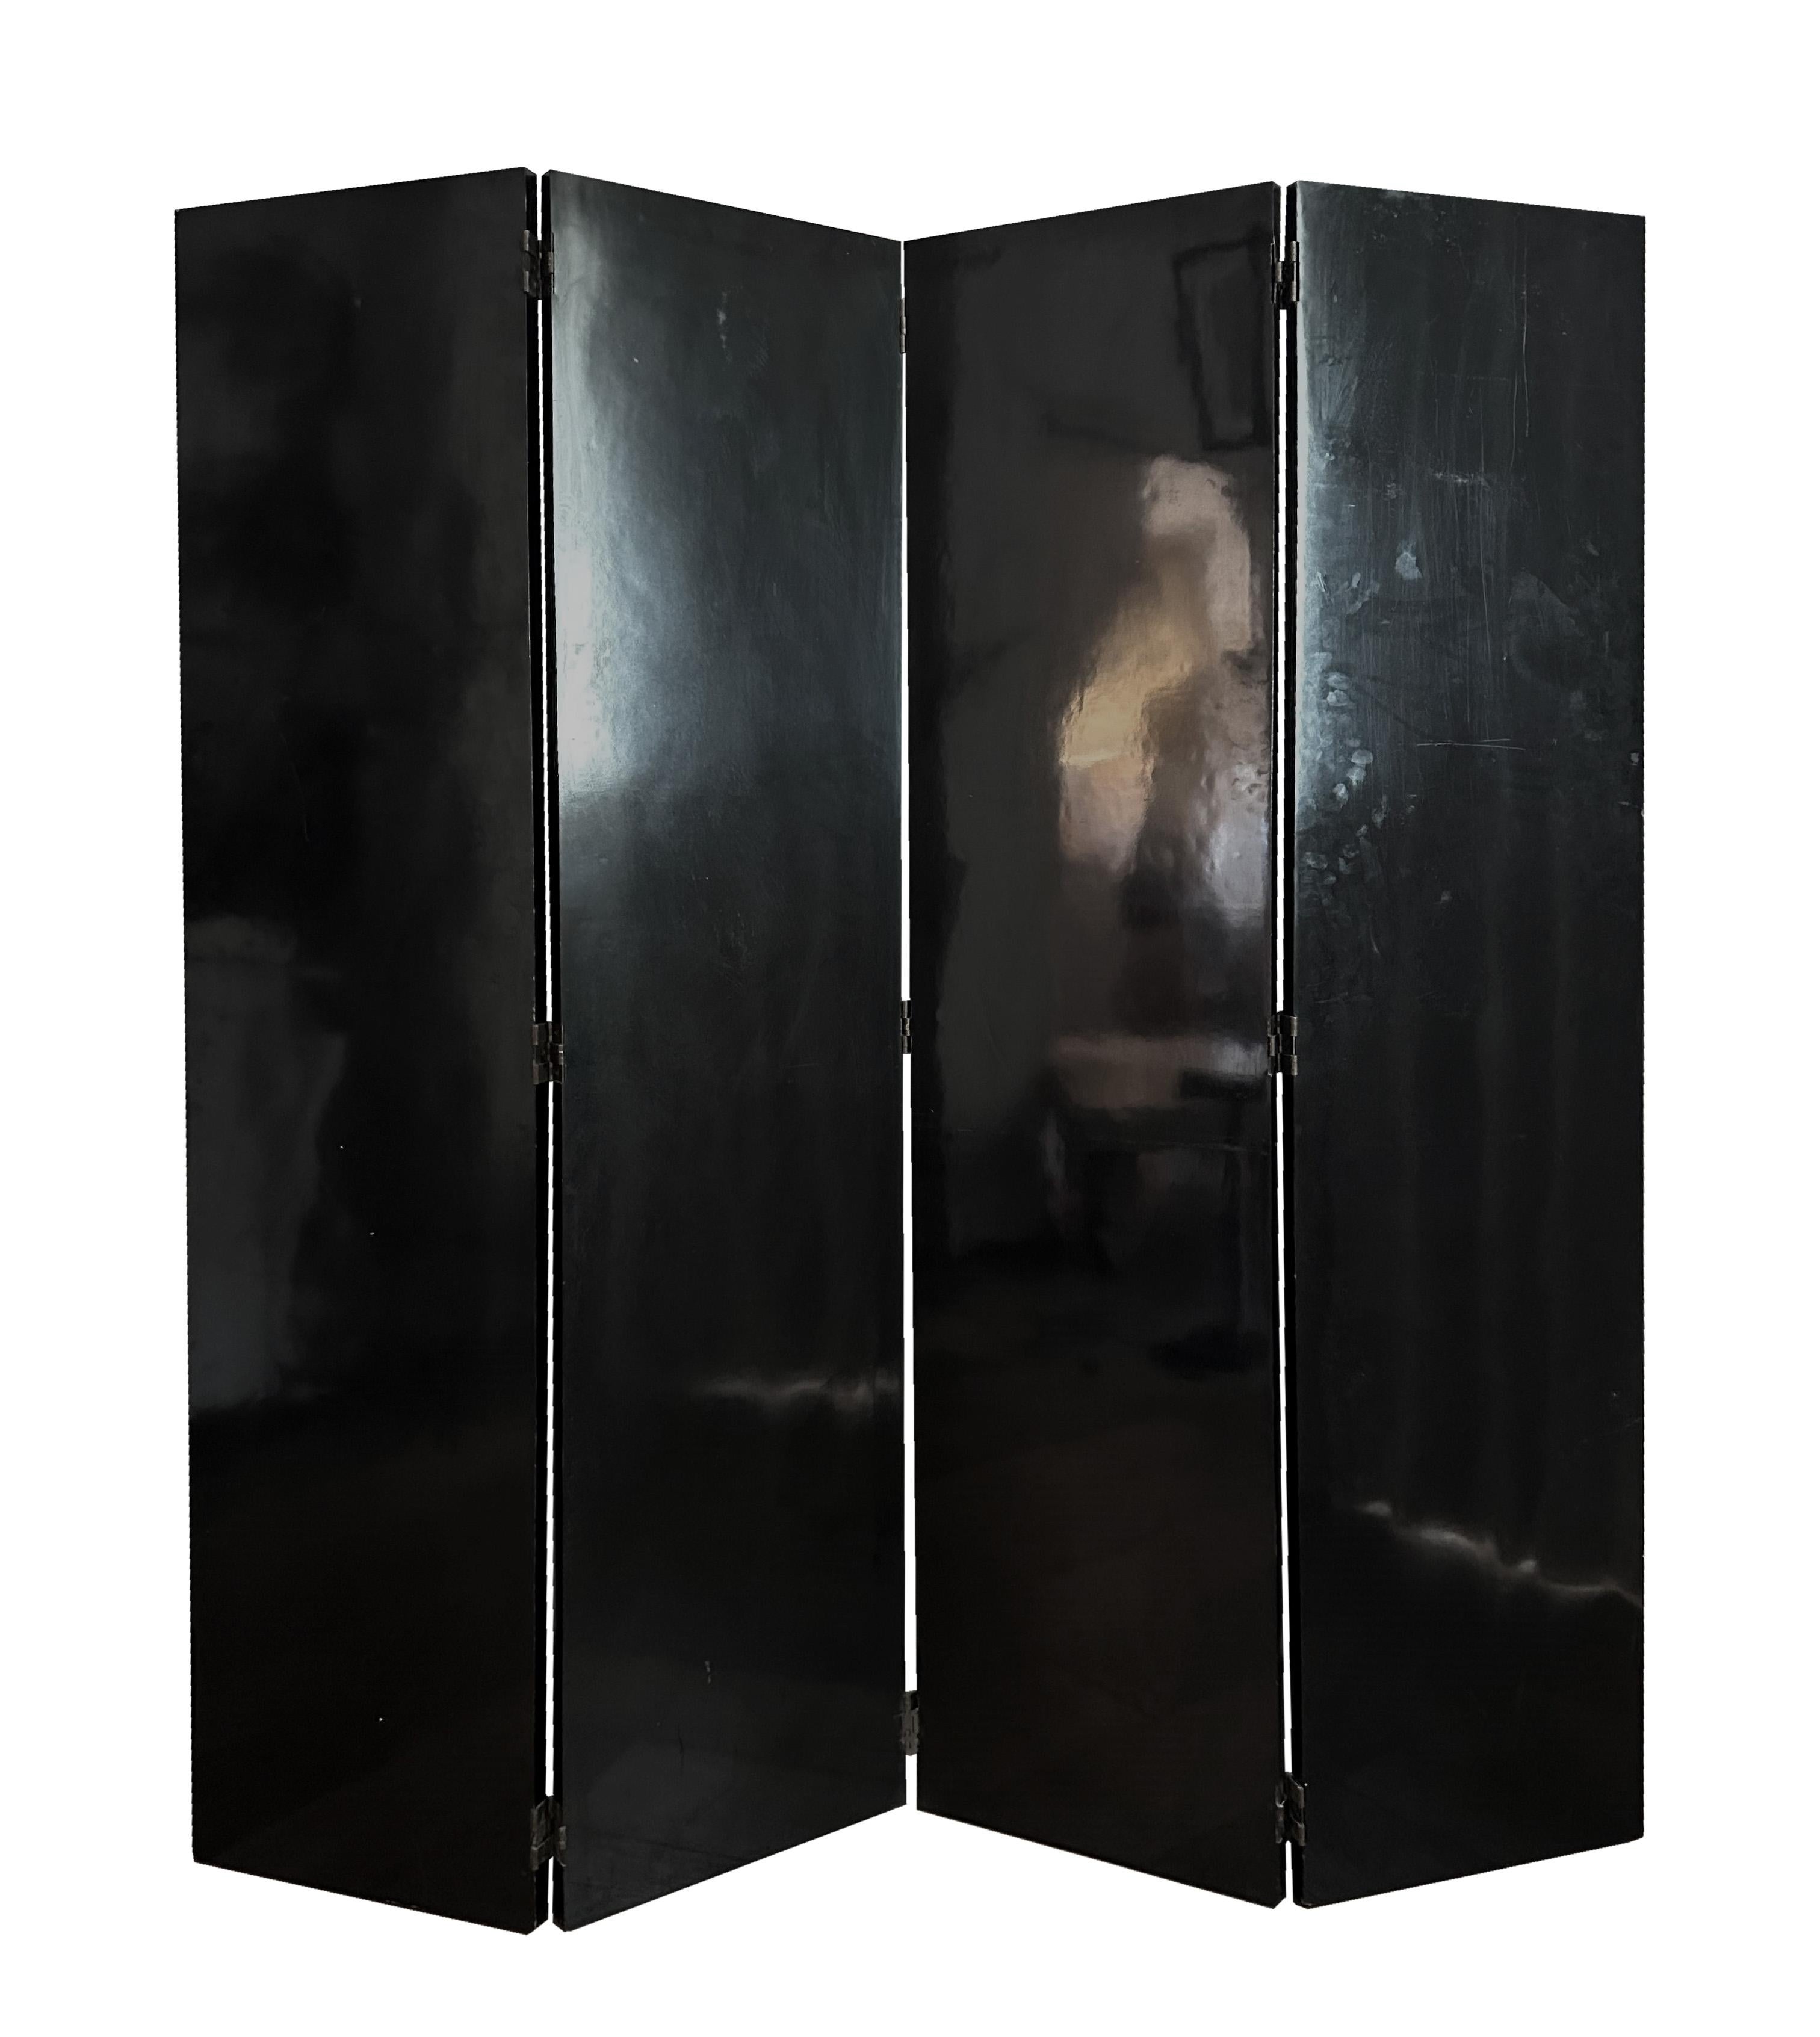 Discover the epitome of Parisian chic with this rare and glamorous lacquered screen, a statement piece that embodies the luxurious spirit of Parisian décor. This exquisite item boasts a striking black and tarnished rose gold lacquer finish on one